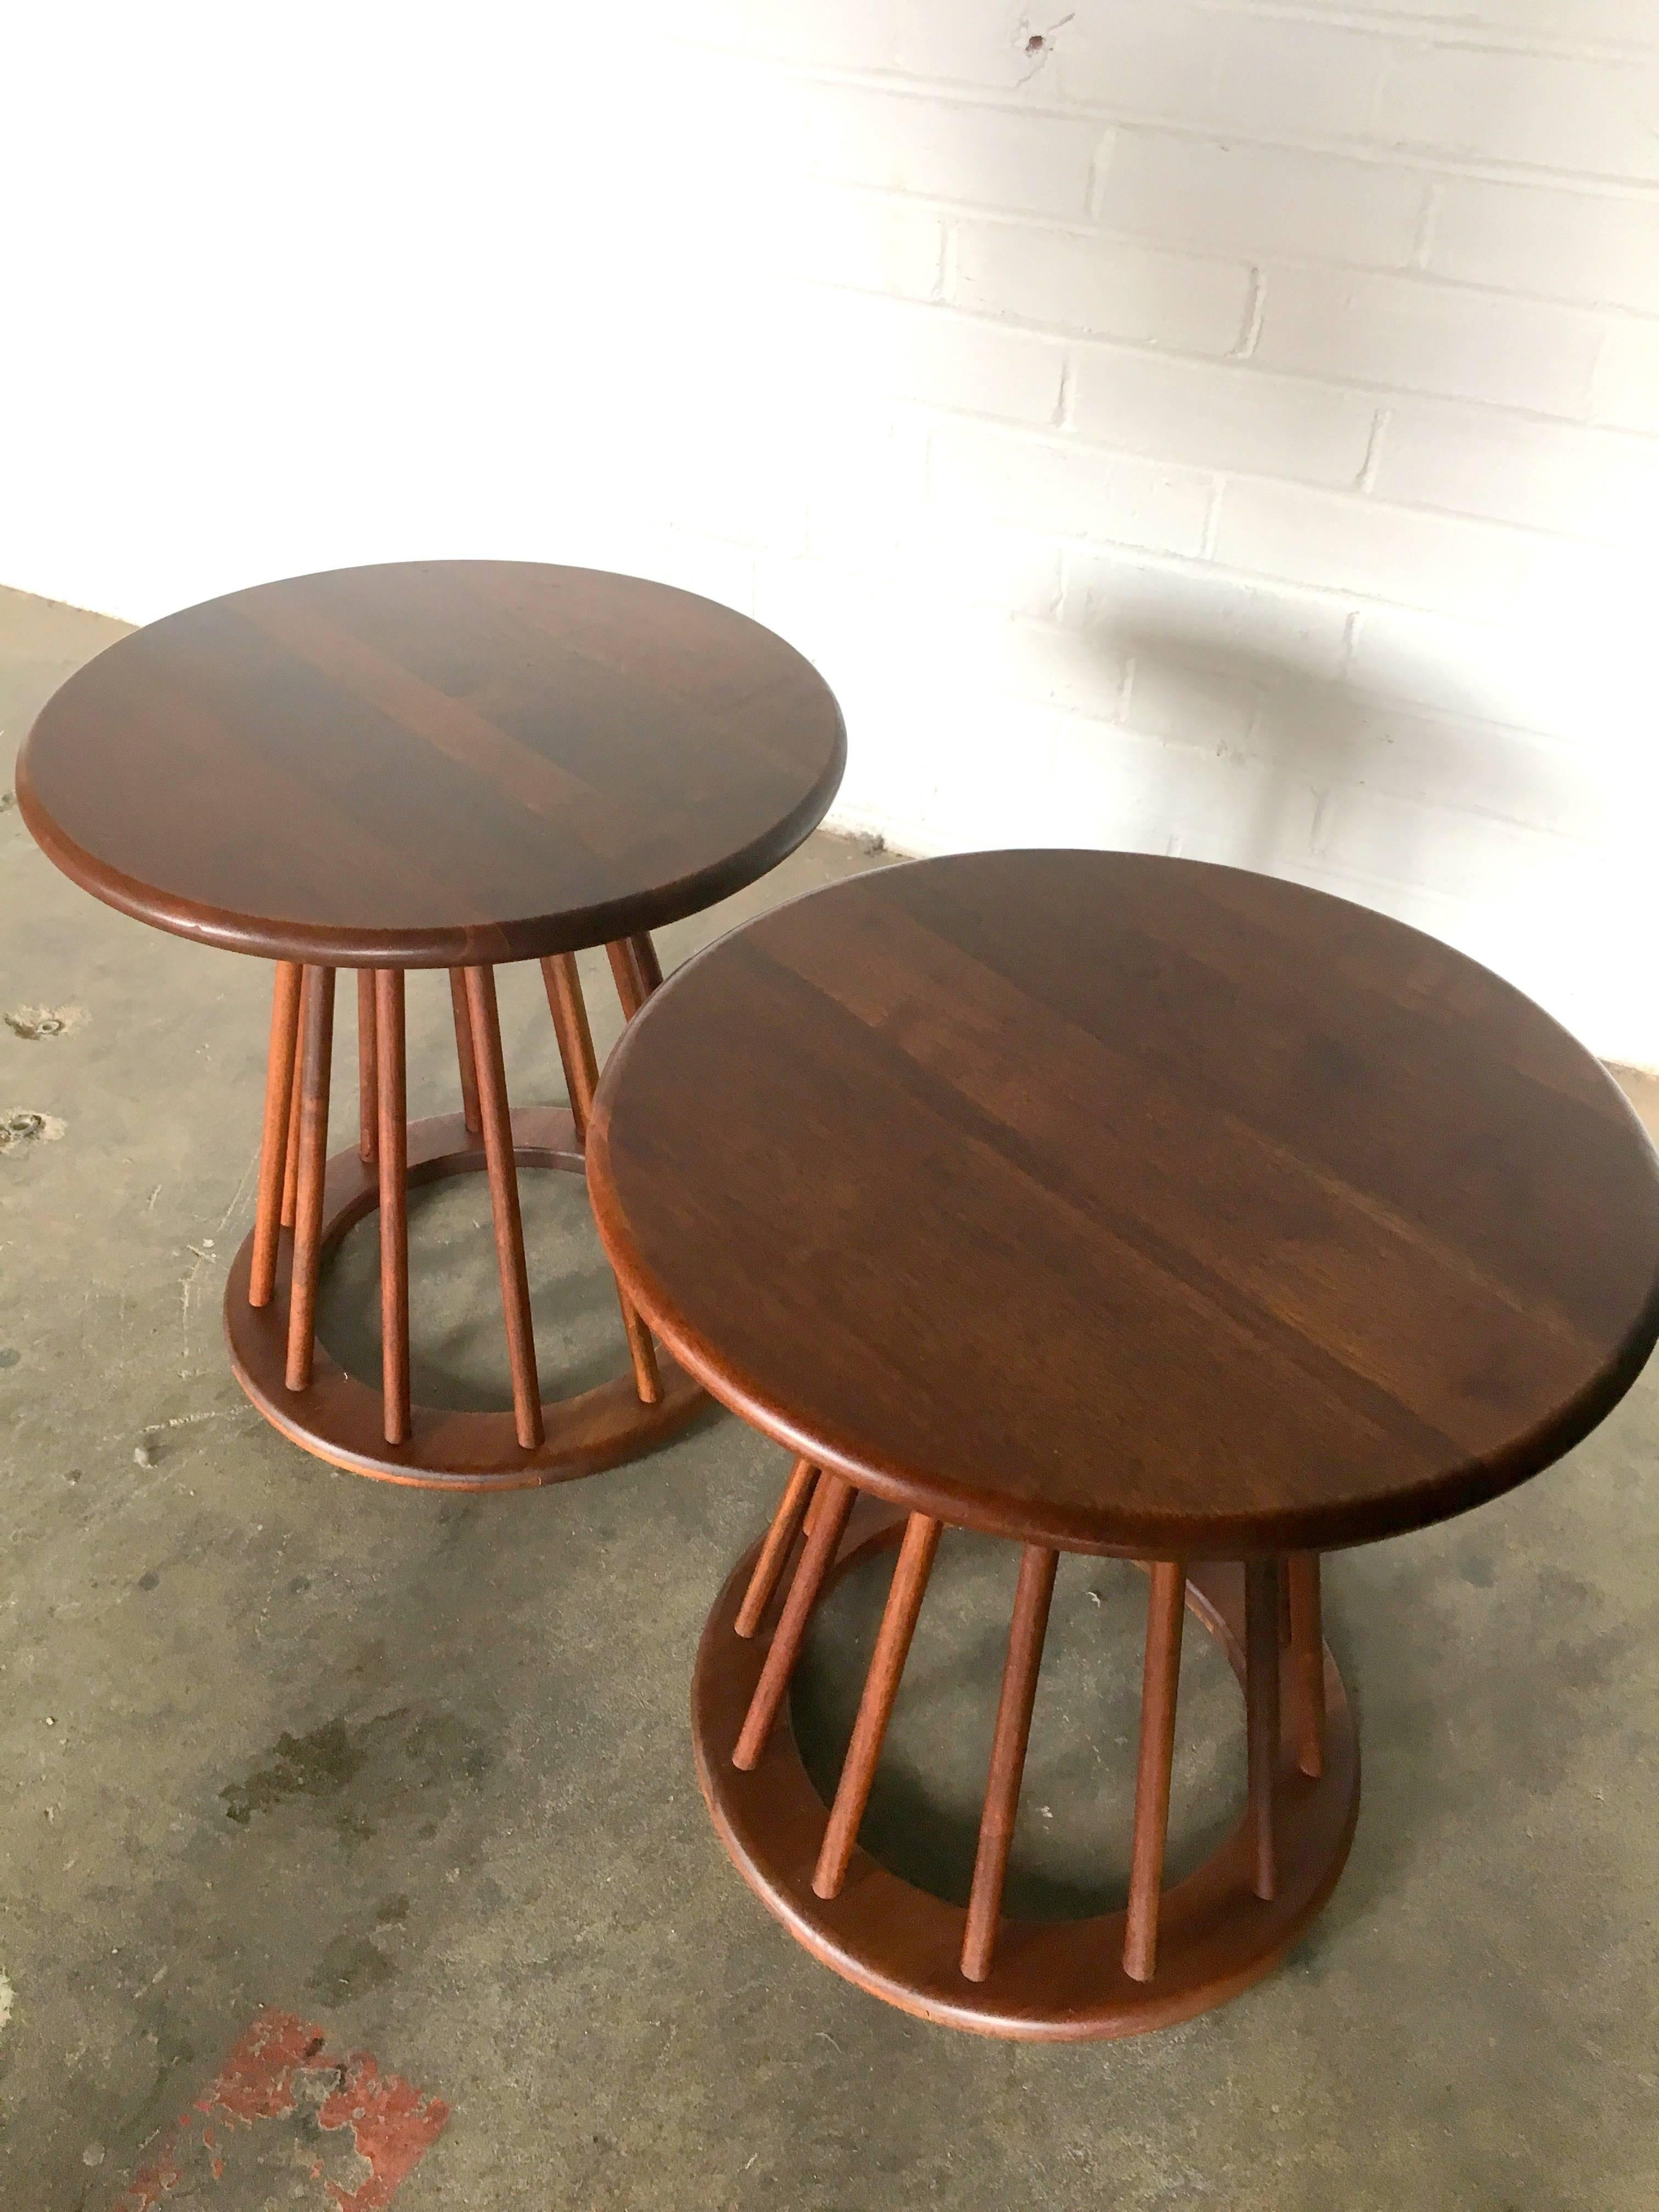 Stunning Pair of Arthur Umanoff Spindle End Tables 1